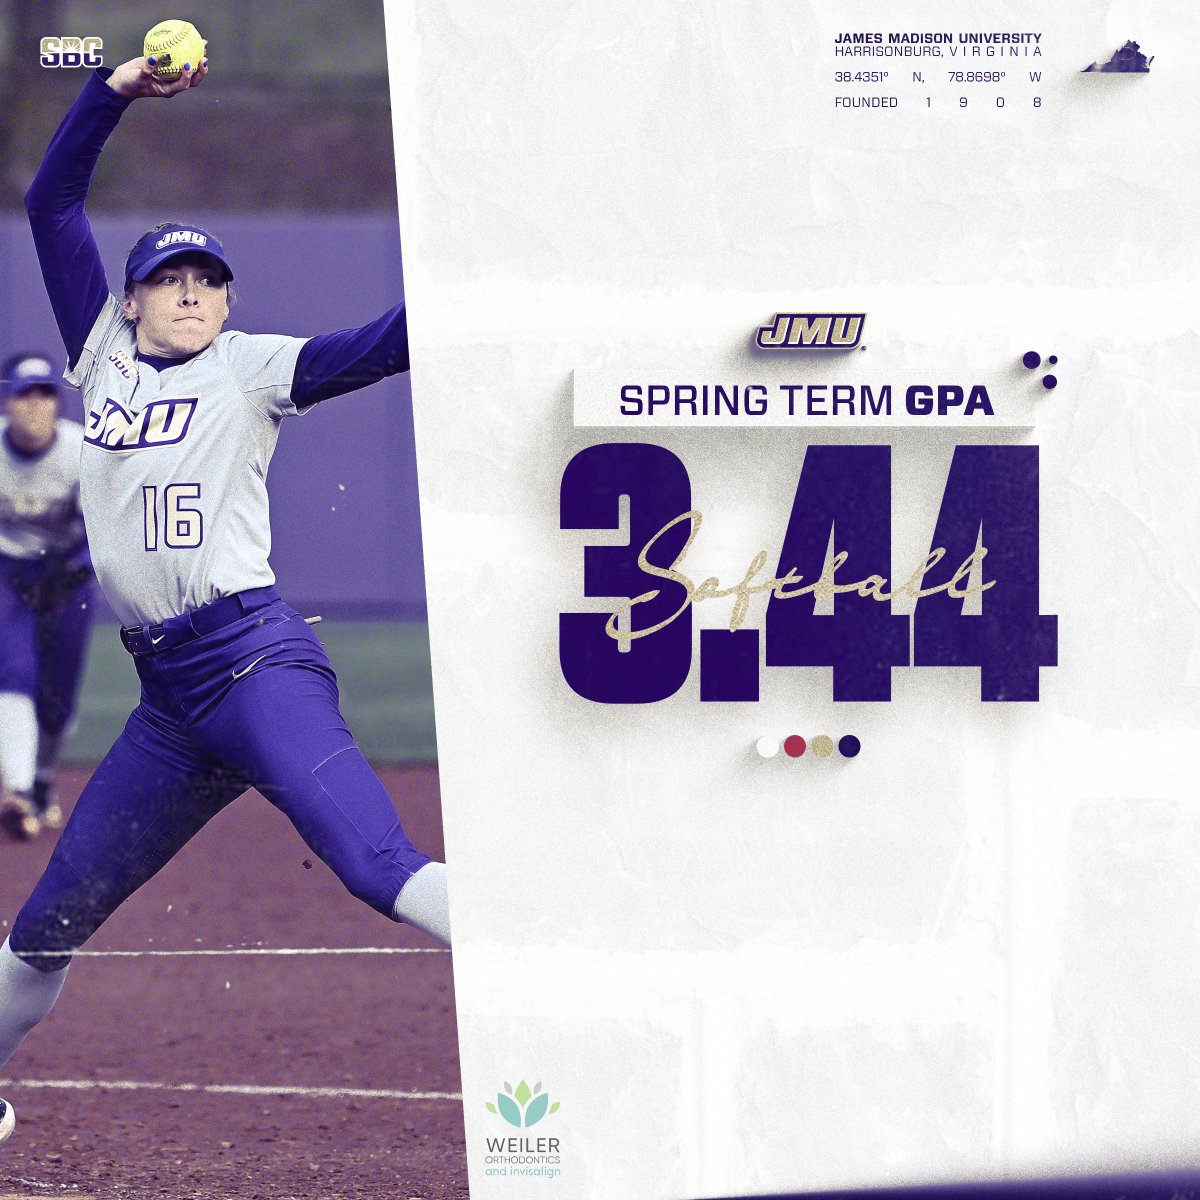 Excelling on the diamond and in the classroom 💪 #GoDukes